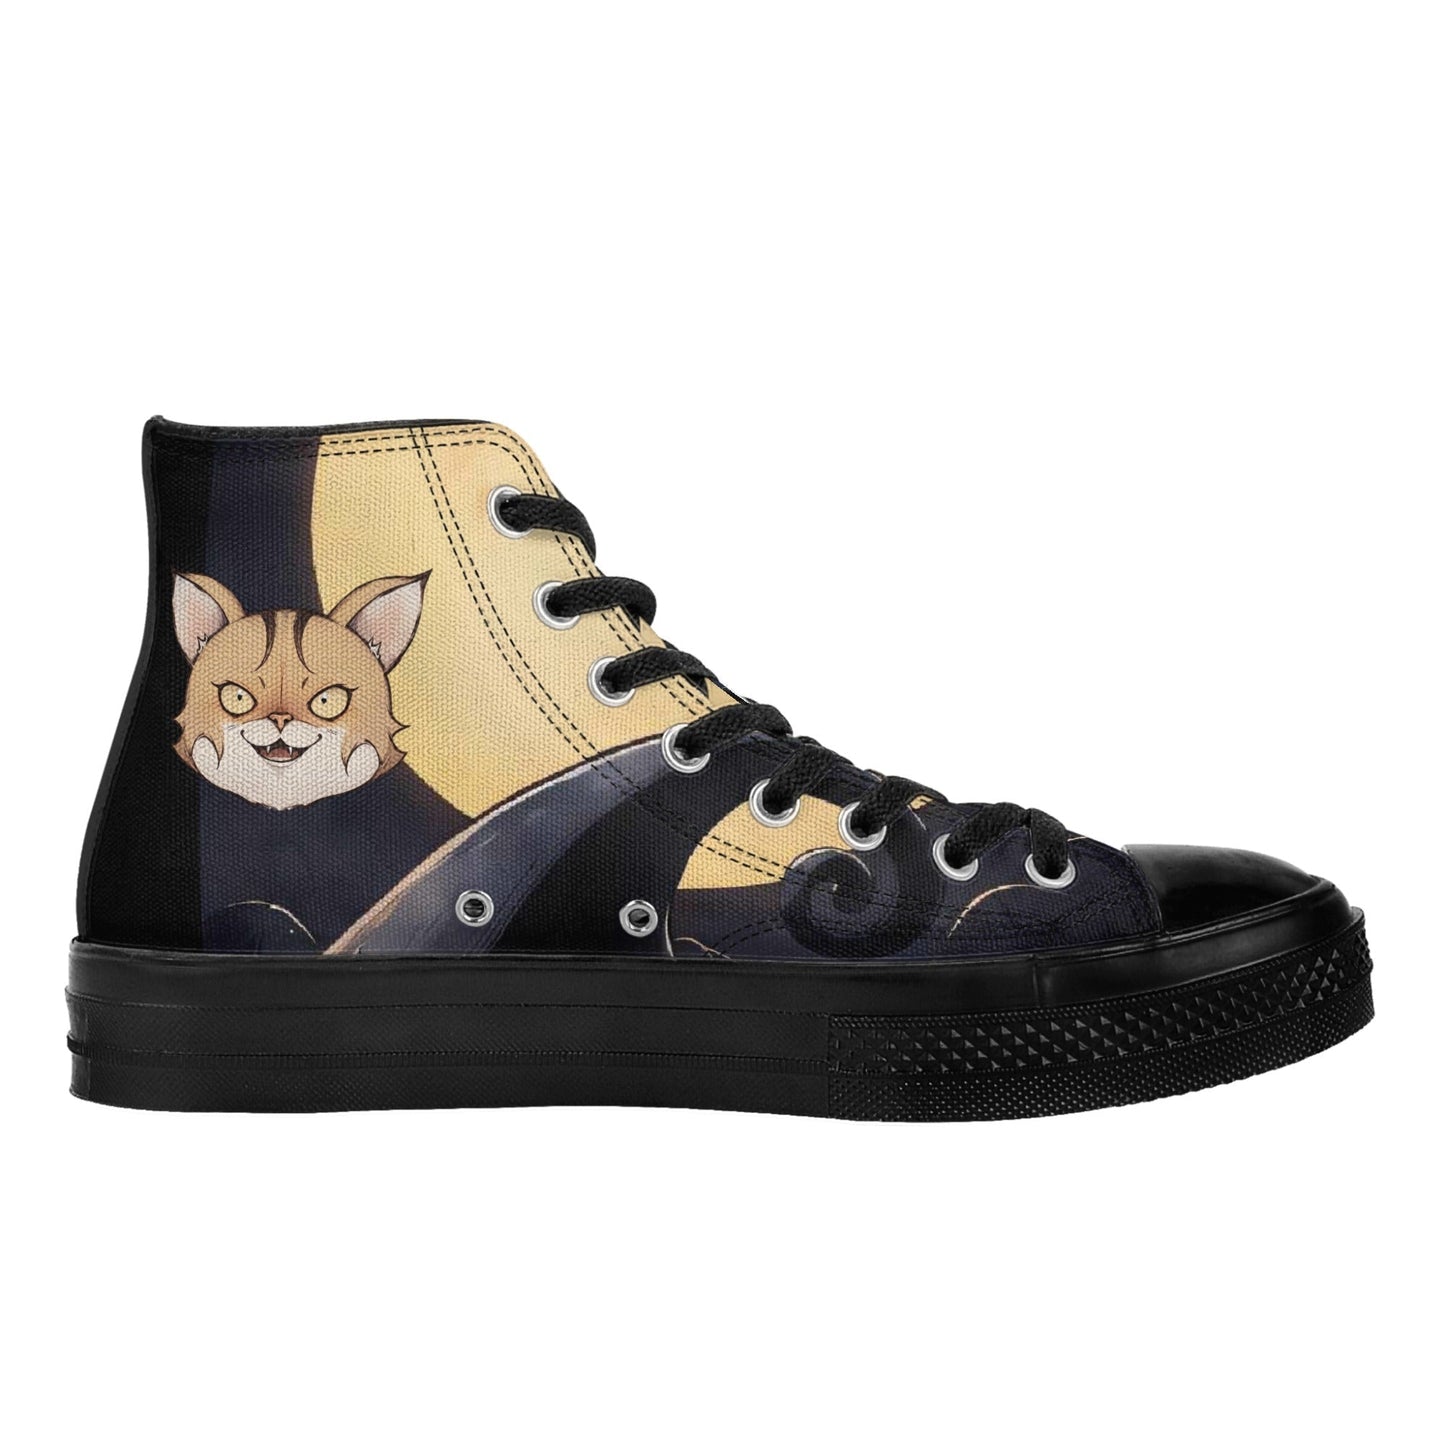 Stand out  with the  Nightmare Before Hey Nugget Mens Classic Black High Top Canvas Shoes  available at Hey Nugget. Grab yours today!